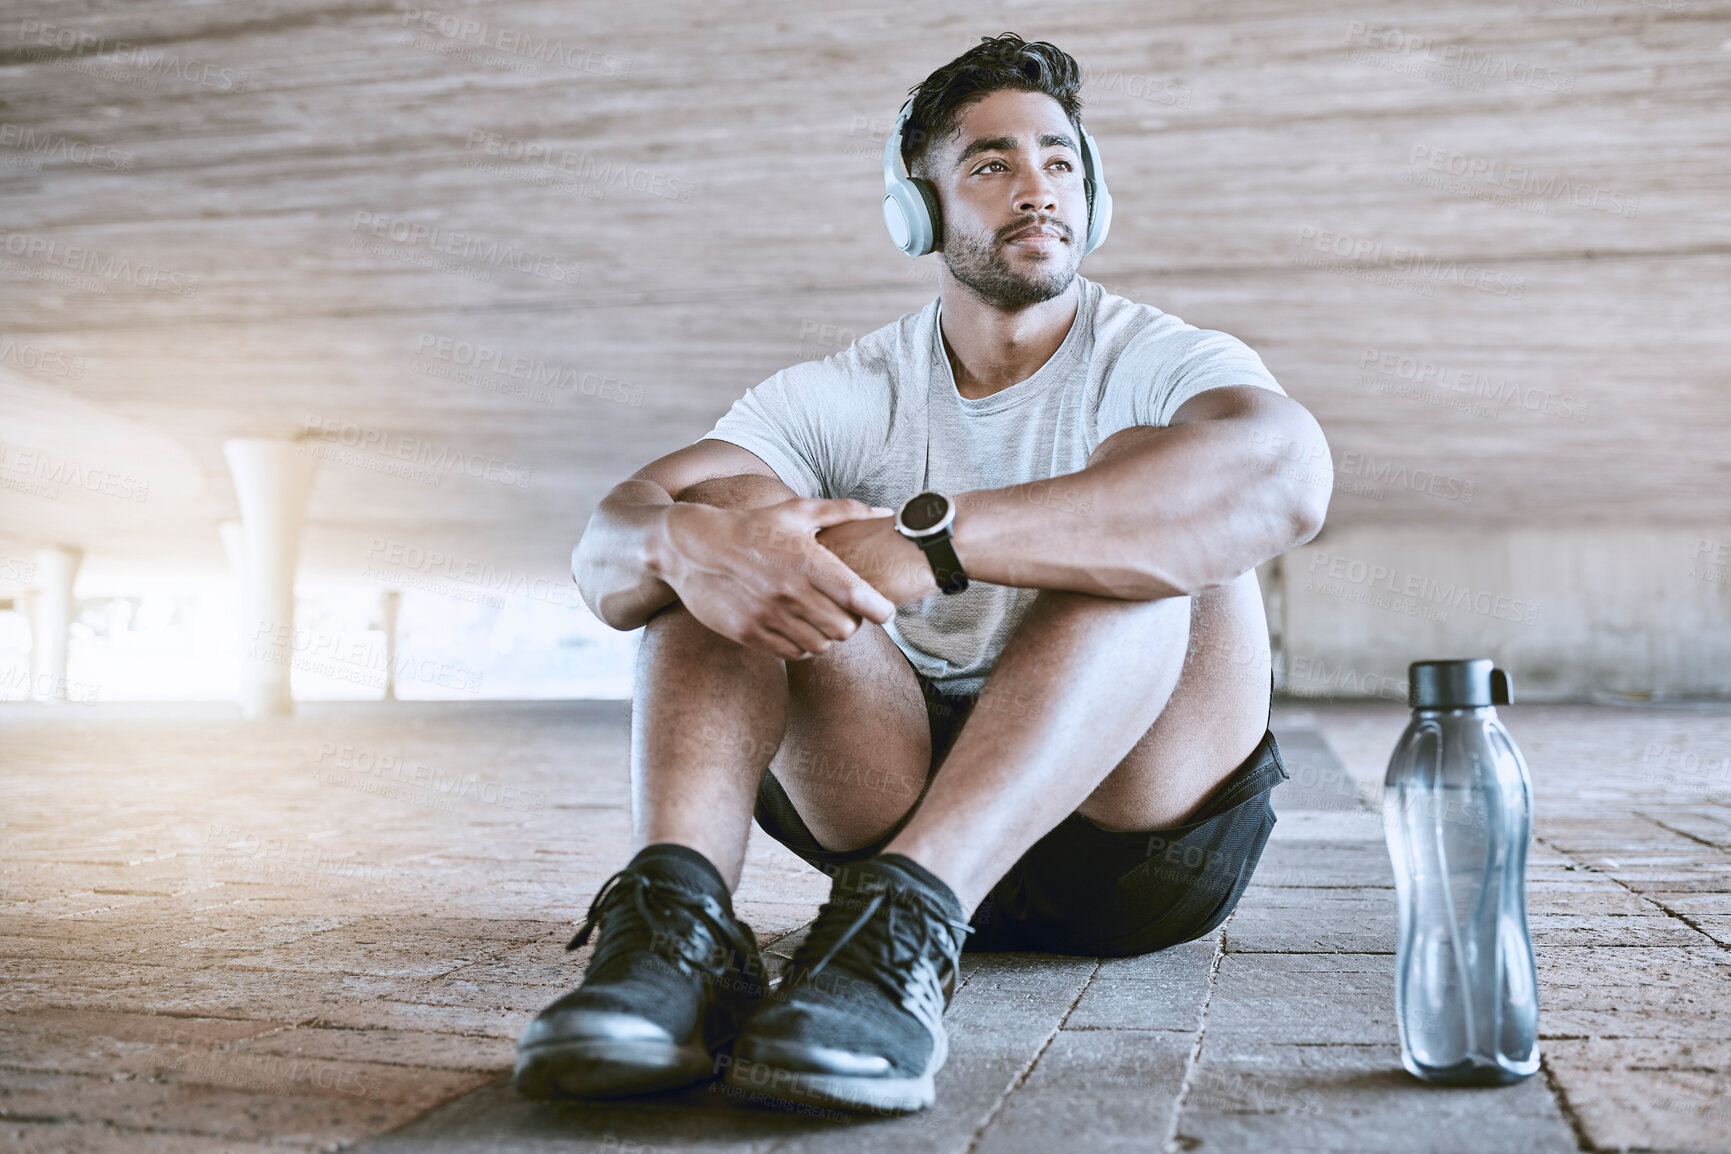 Buy stock photo Athlete with headphones and water bottle on a relax break listening to music after his training exercise in the city with lens flare. Young sports man with audio fitness technology and workout gear